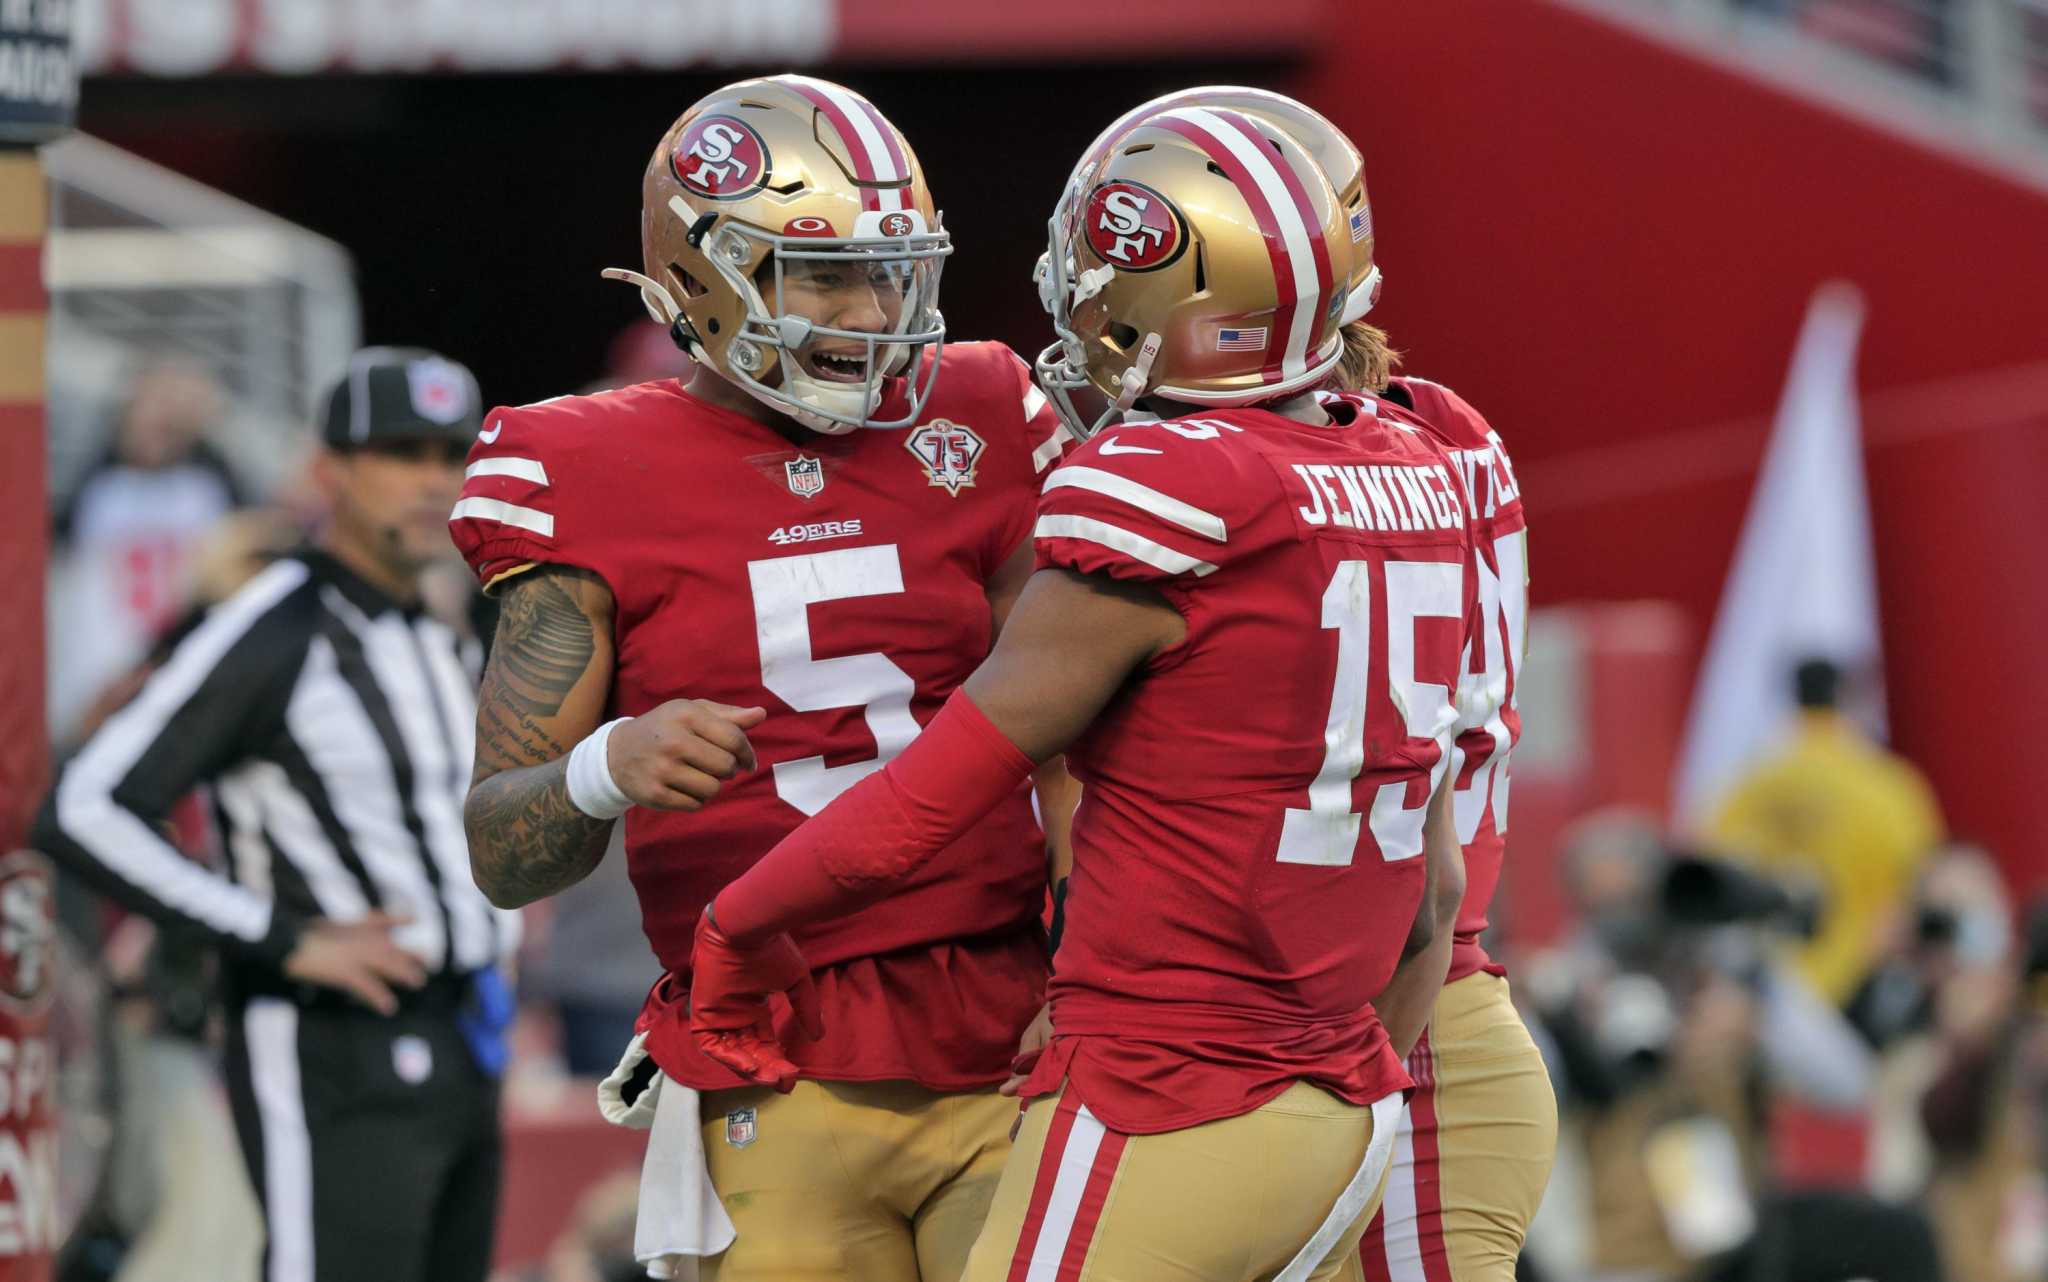 Lance throws 2 TD passes to lead 49ers past Texans 23-7